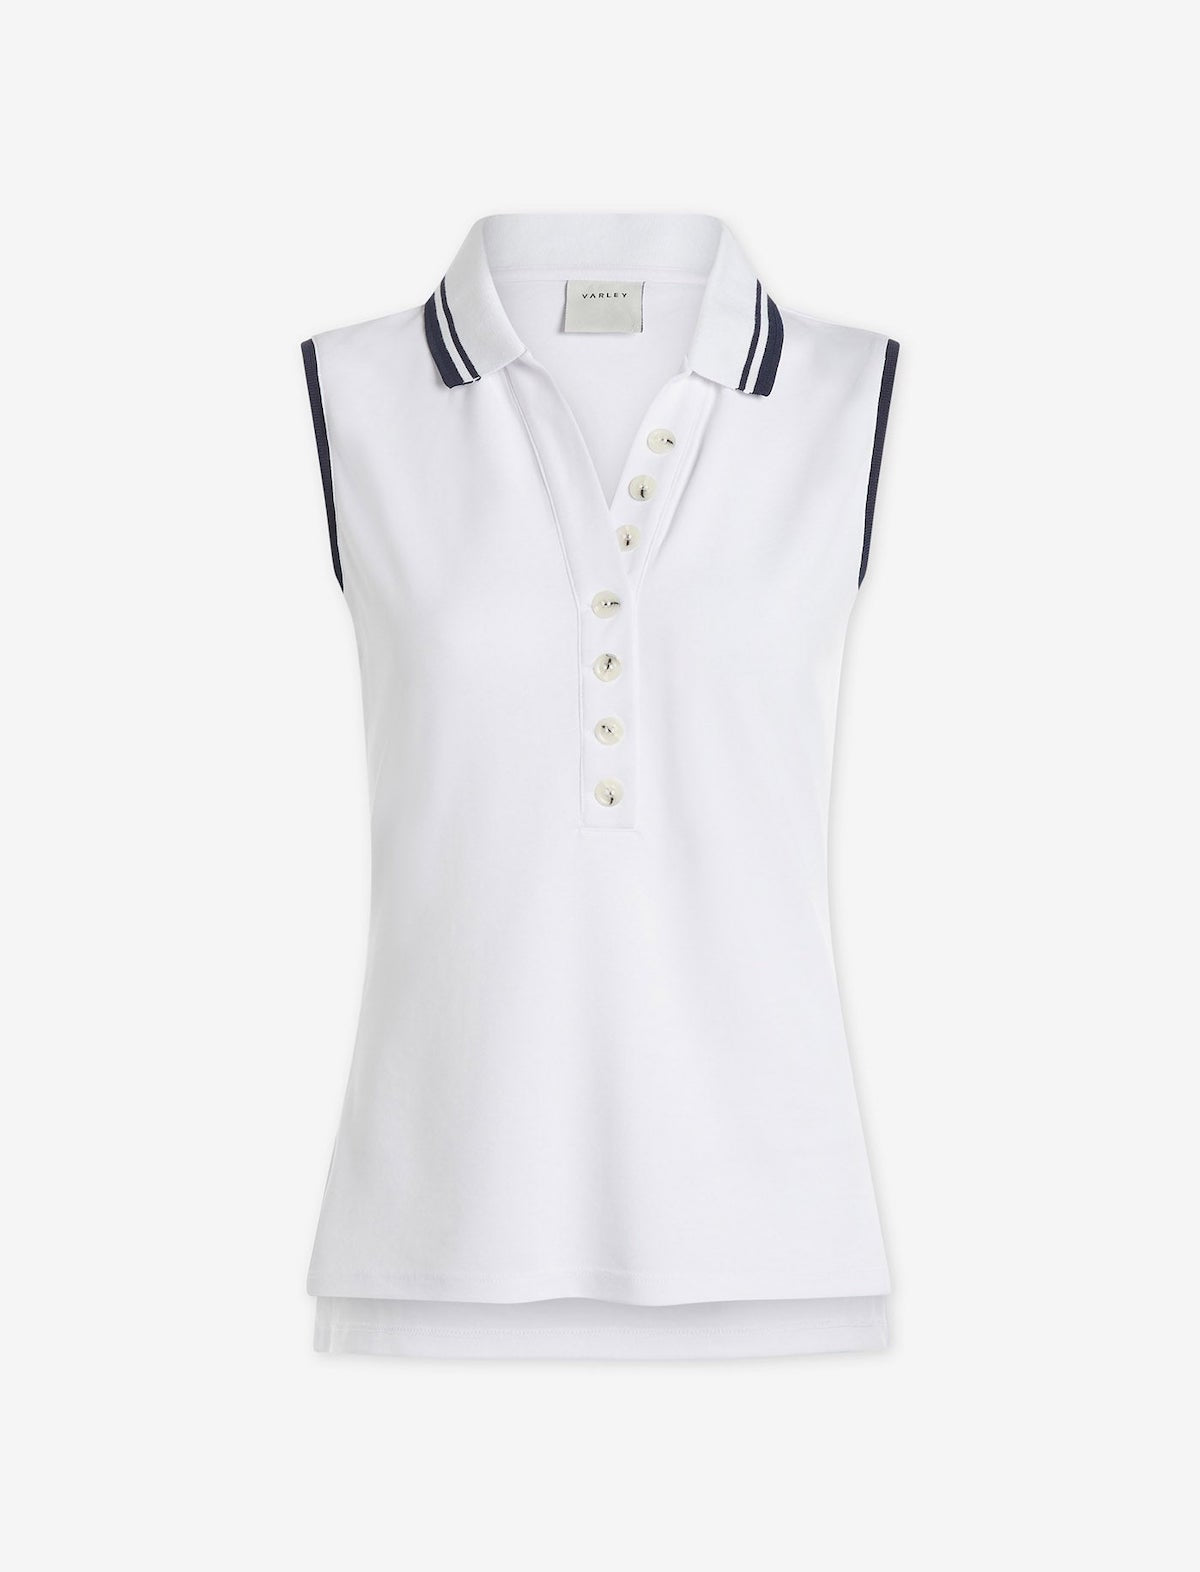 VARLEY Anvier Performance Polo in White